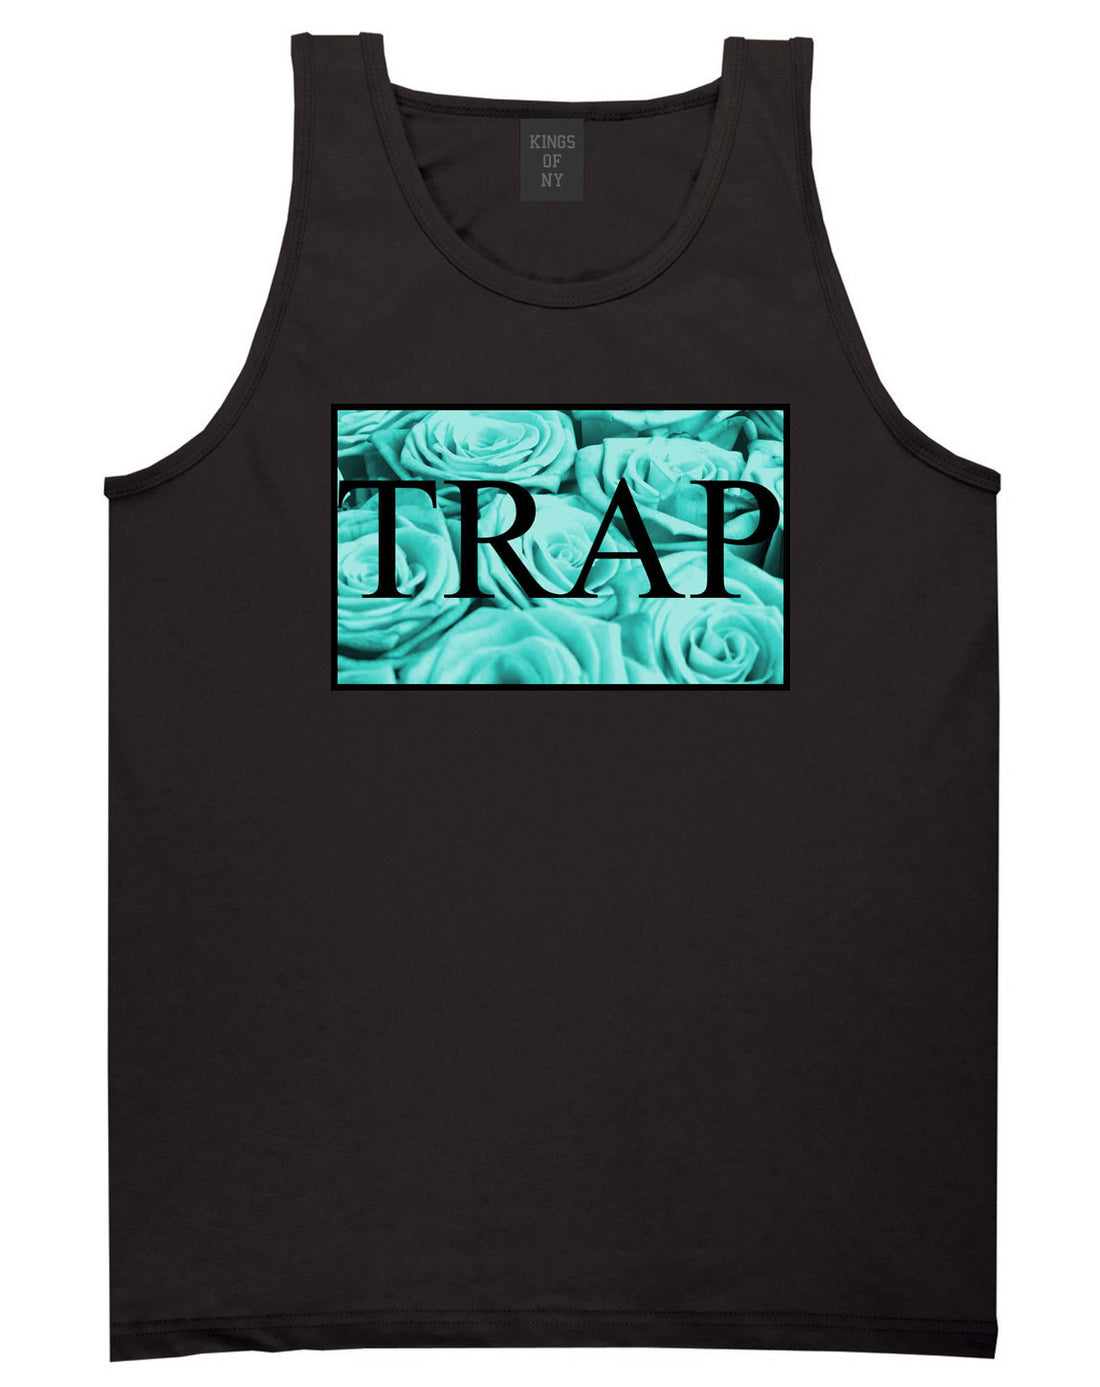 Trap Floral Style Hood Music Hood Dope Tank Top In Black by Kings Of NY